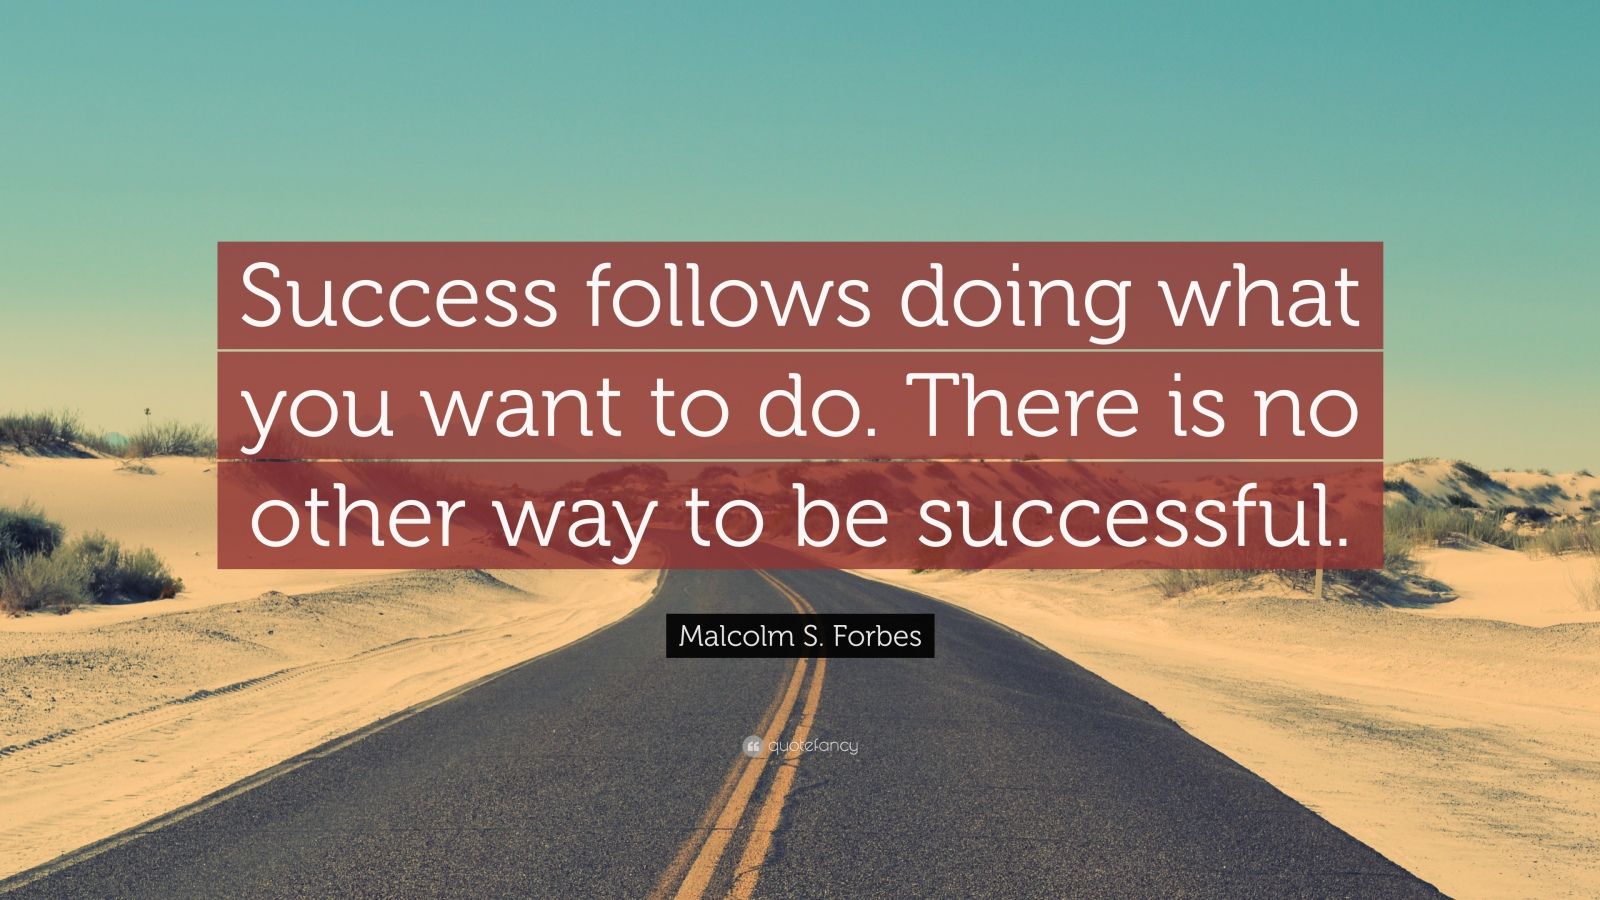 Malcolm S. Forbes Quote: “Success follows doing what you want to do ...